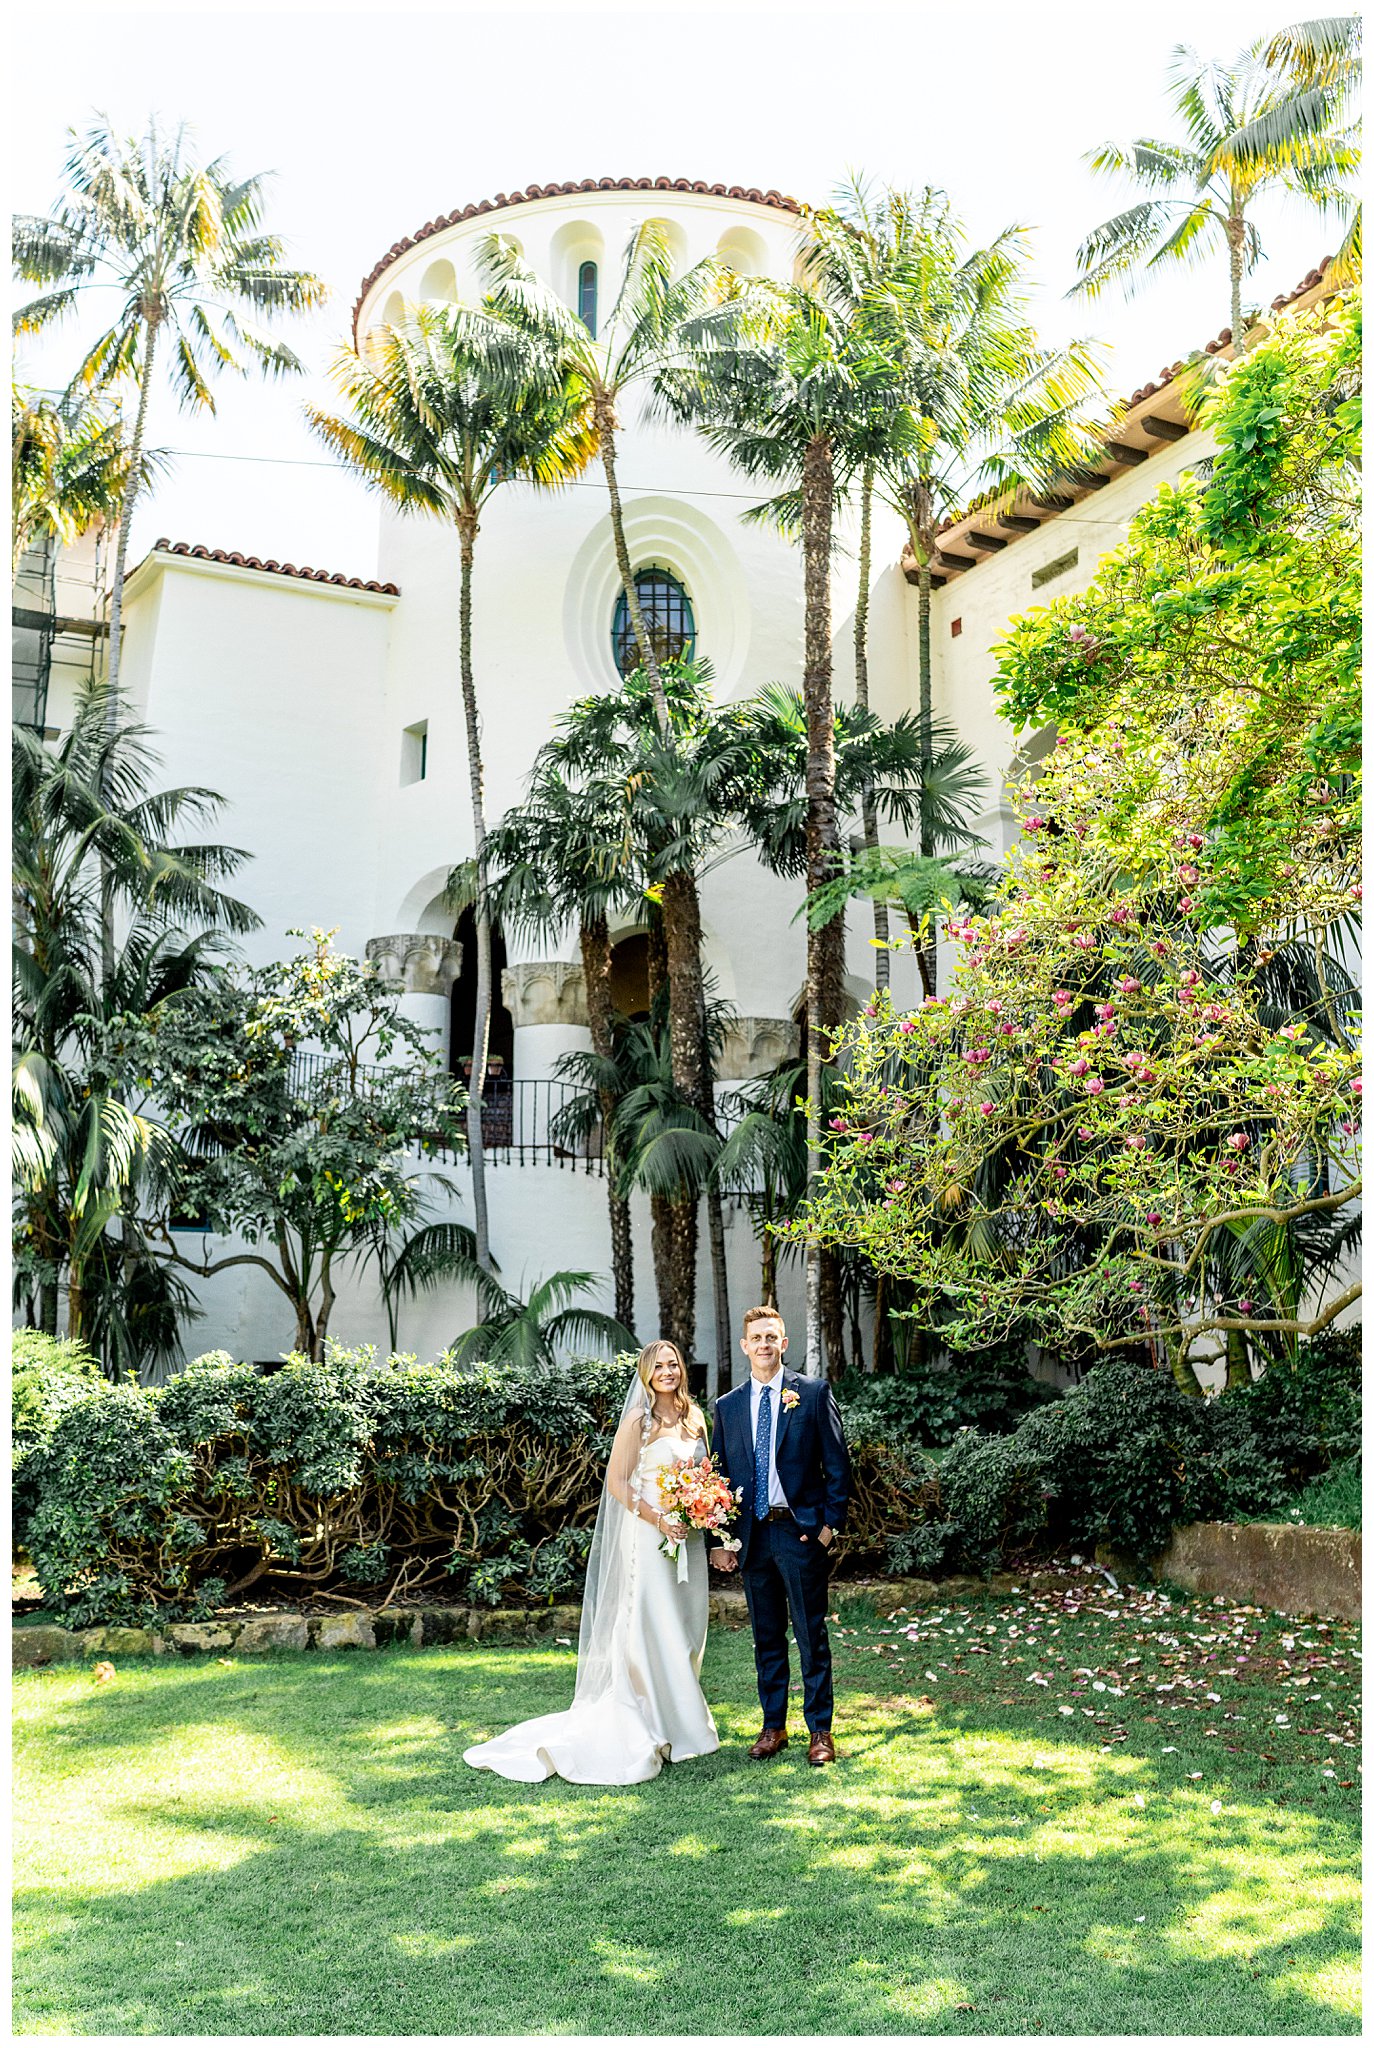 A bride and groom and wedding attire stand underneath the Spanish architecture at the Santa Barbara courthouse in the sunken Gardens on their wedding day.